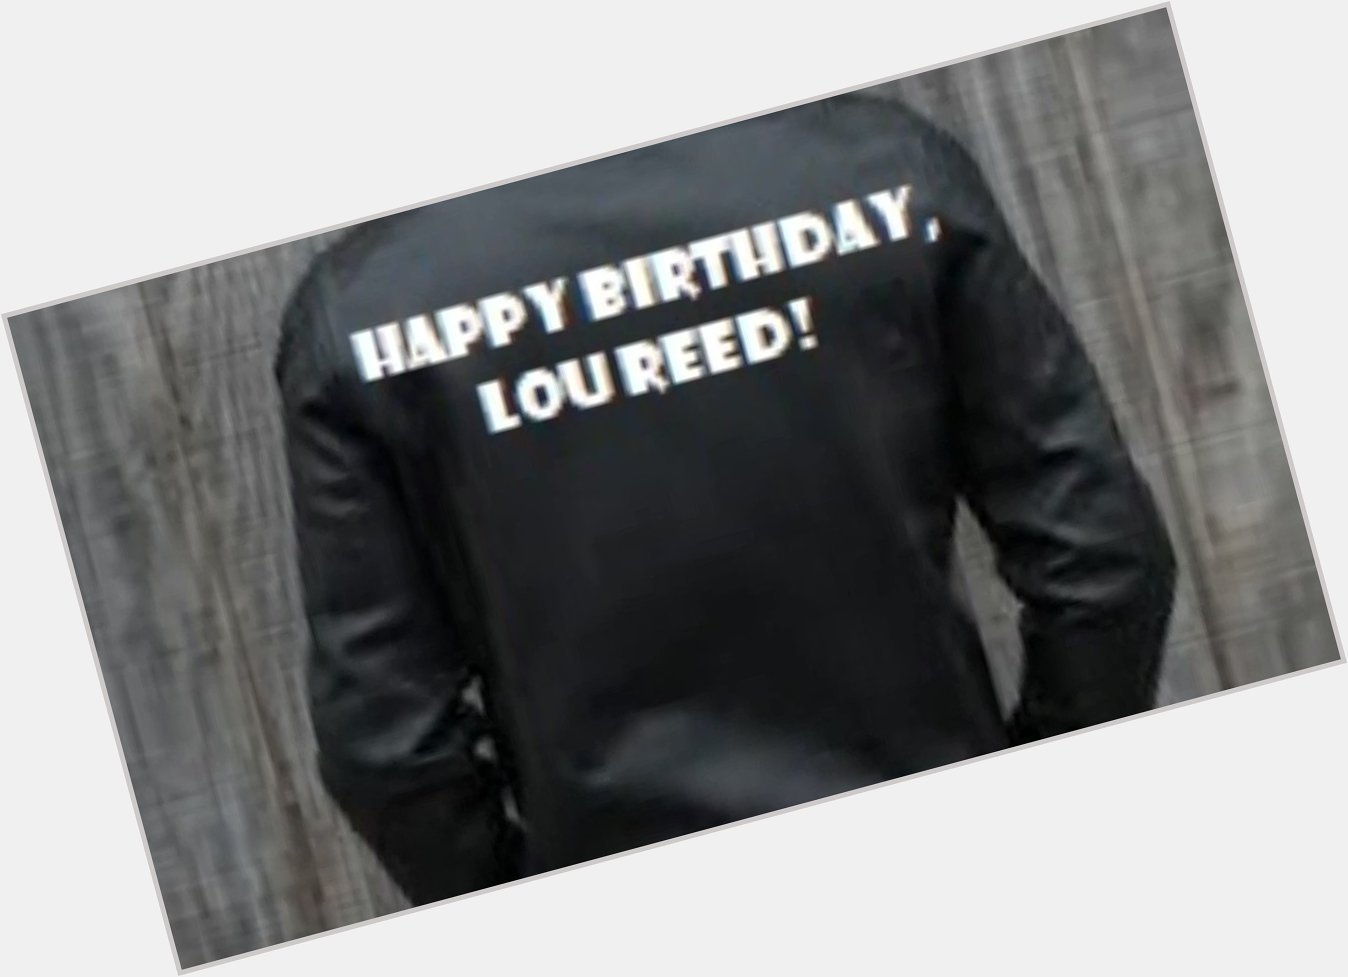 \"Lou Reed\" - Happy Birthday, Lou Reed!
Today would have been his 79th birthday! 